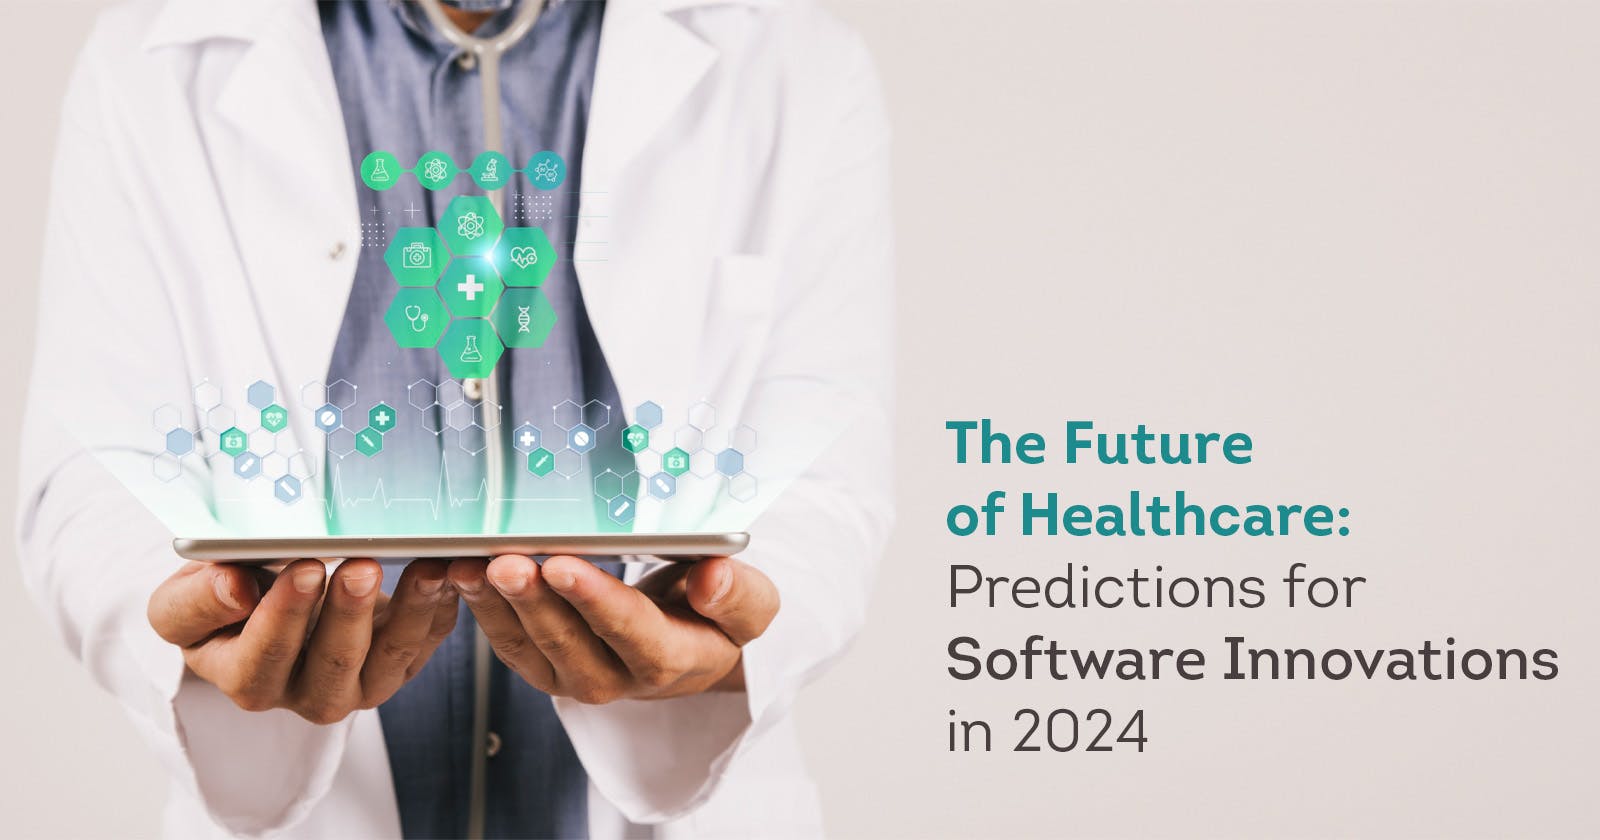 The Future of Healthcare: Predictions for Software Innovations in 2024